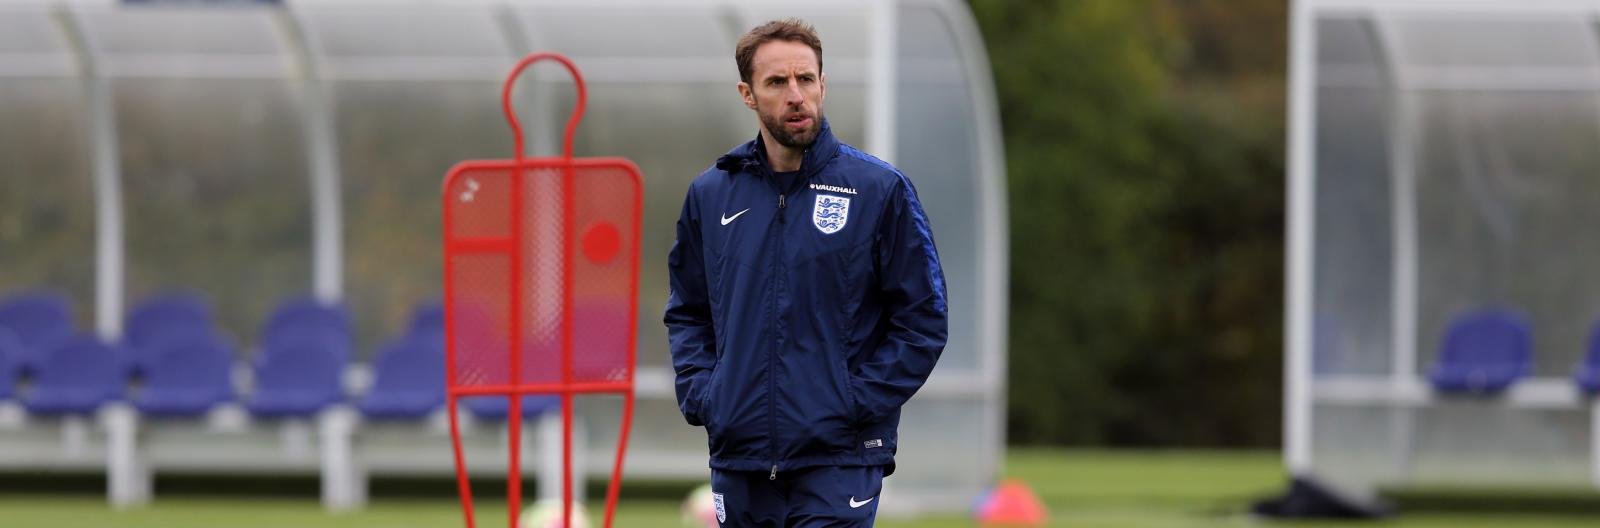 Southgate set to be appointed England manager on Wednesday